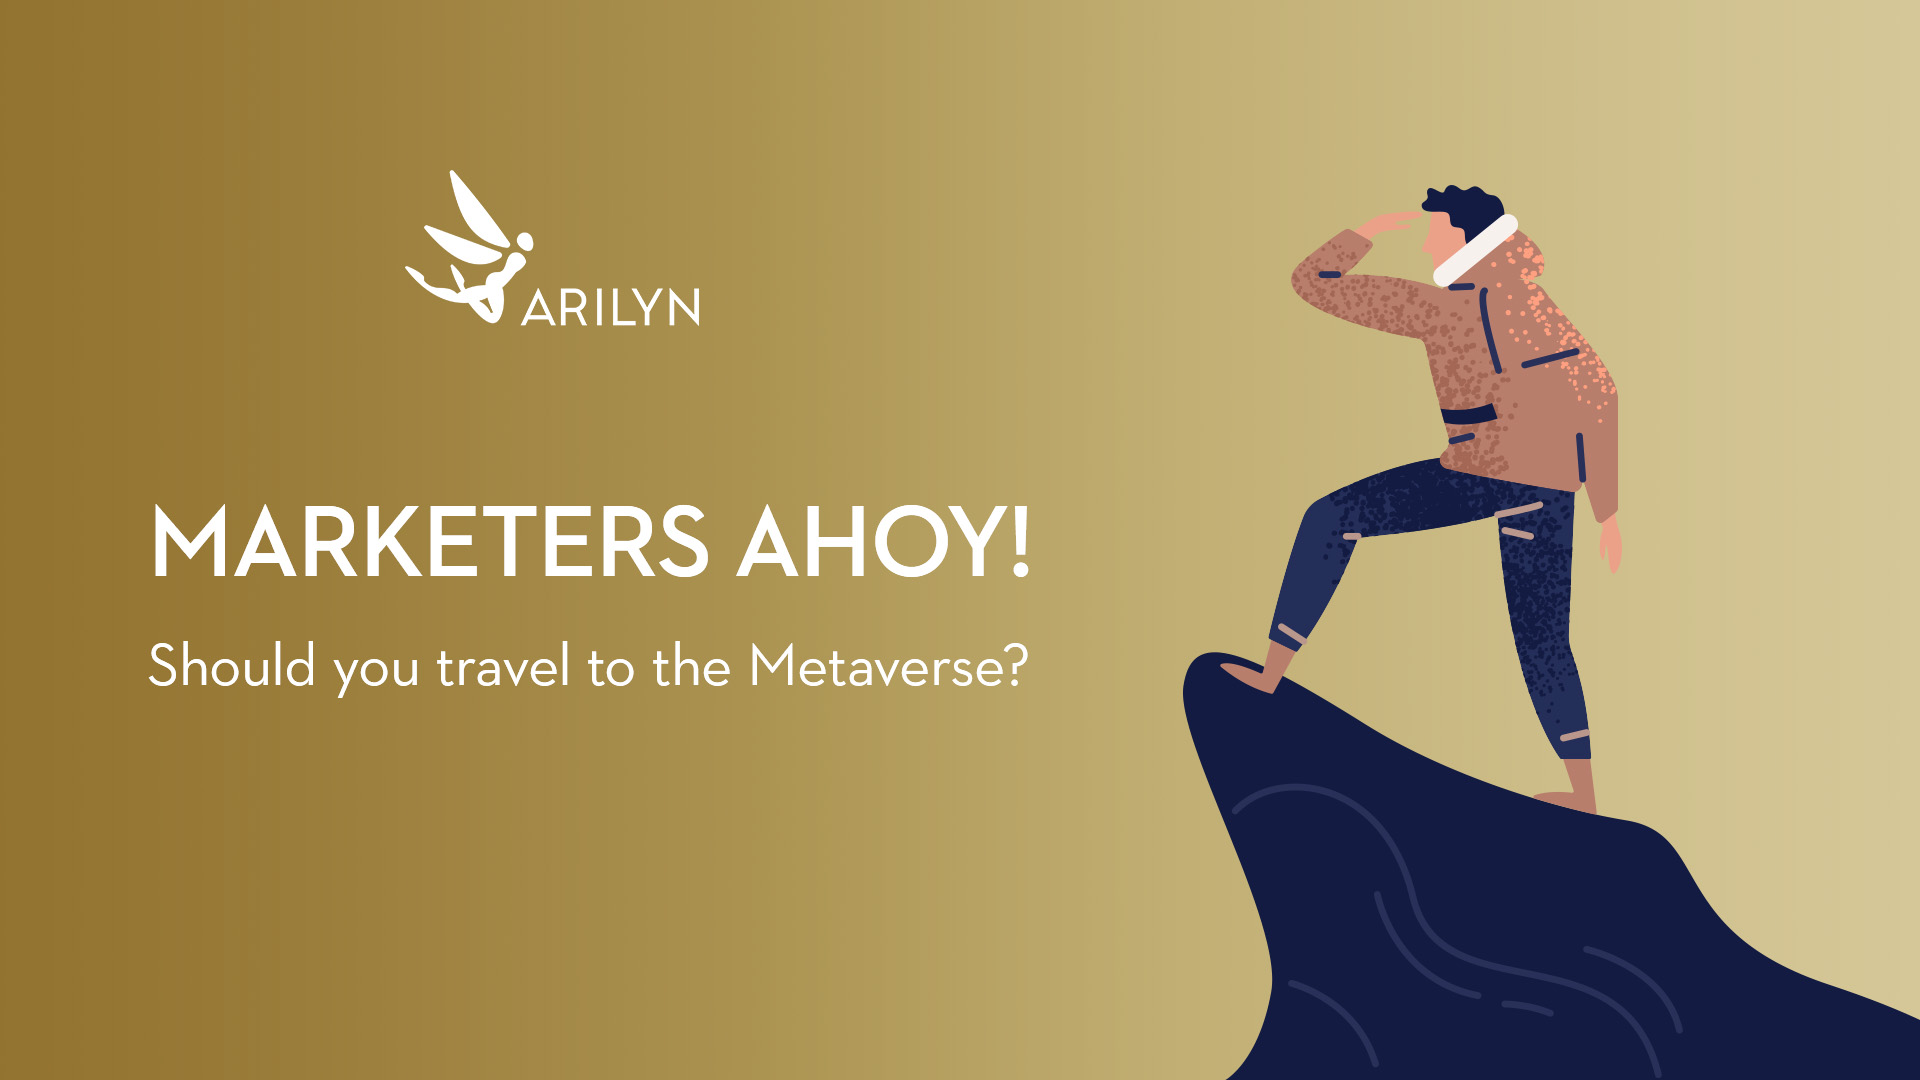 Should you travel to the Metaverse?